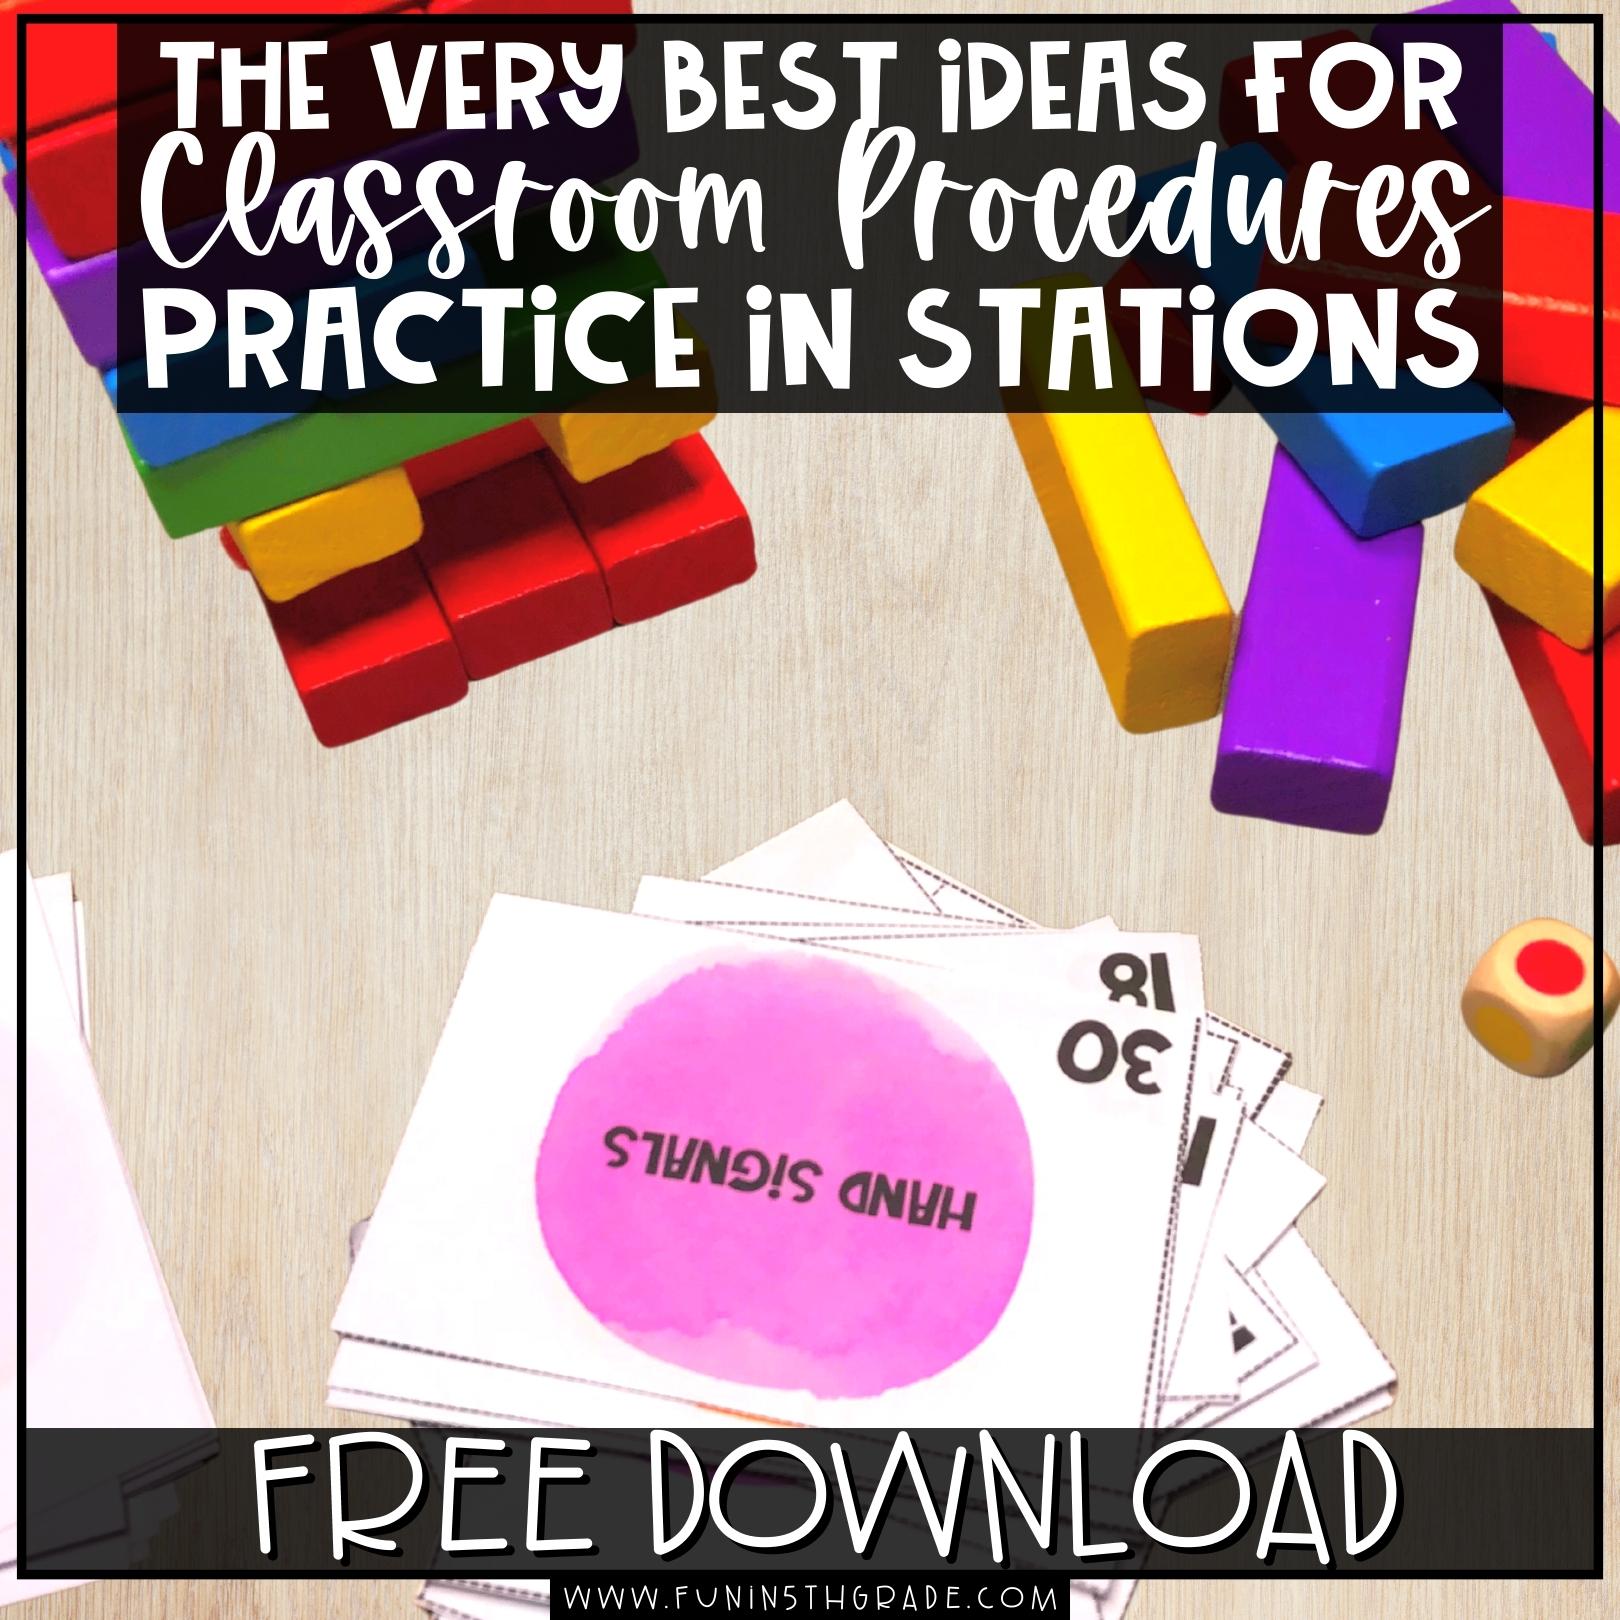 Best Ideas for Practicing Classroom Procedures in Stations (Blog Image)